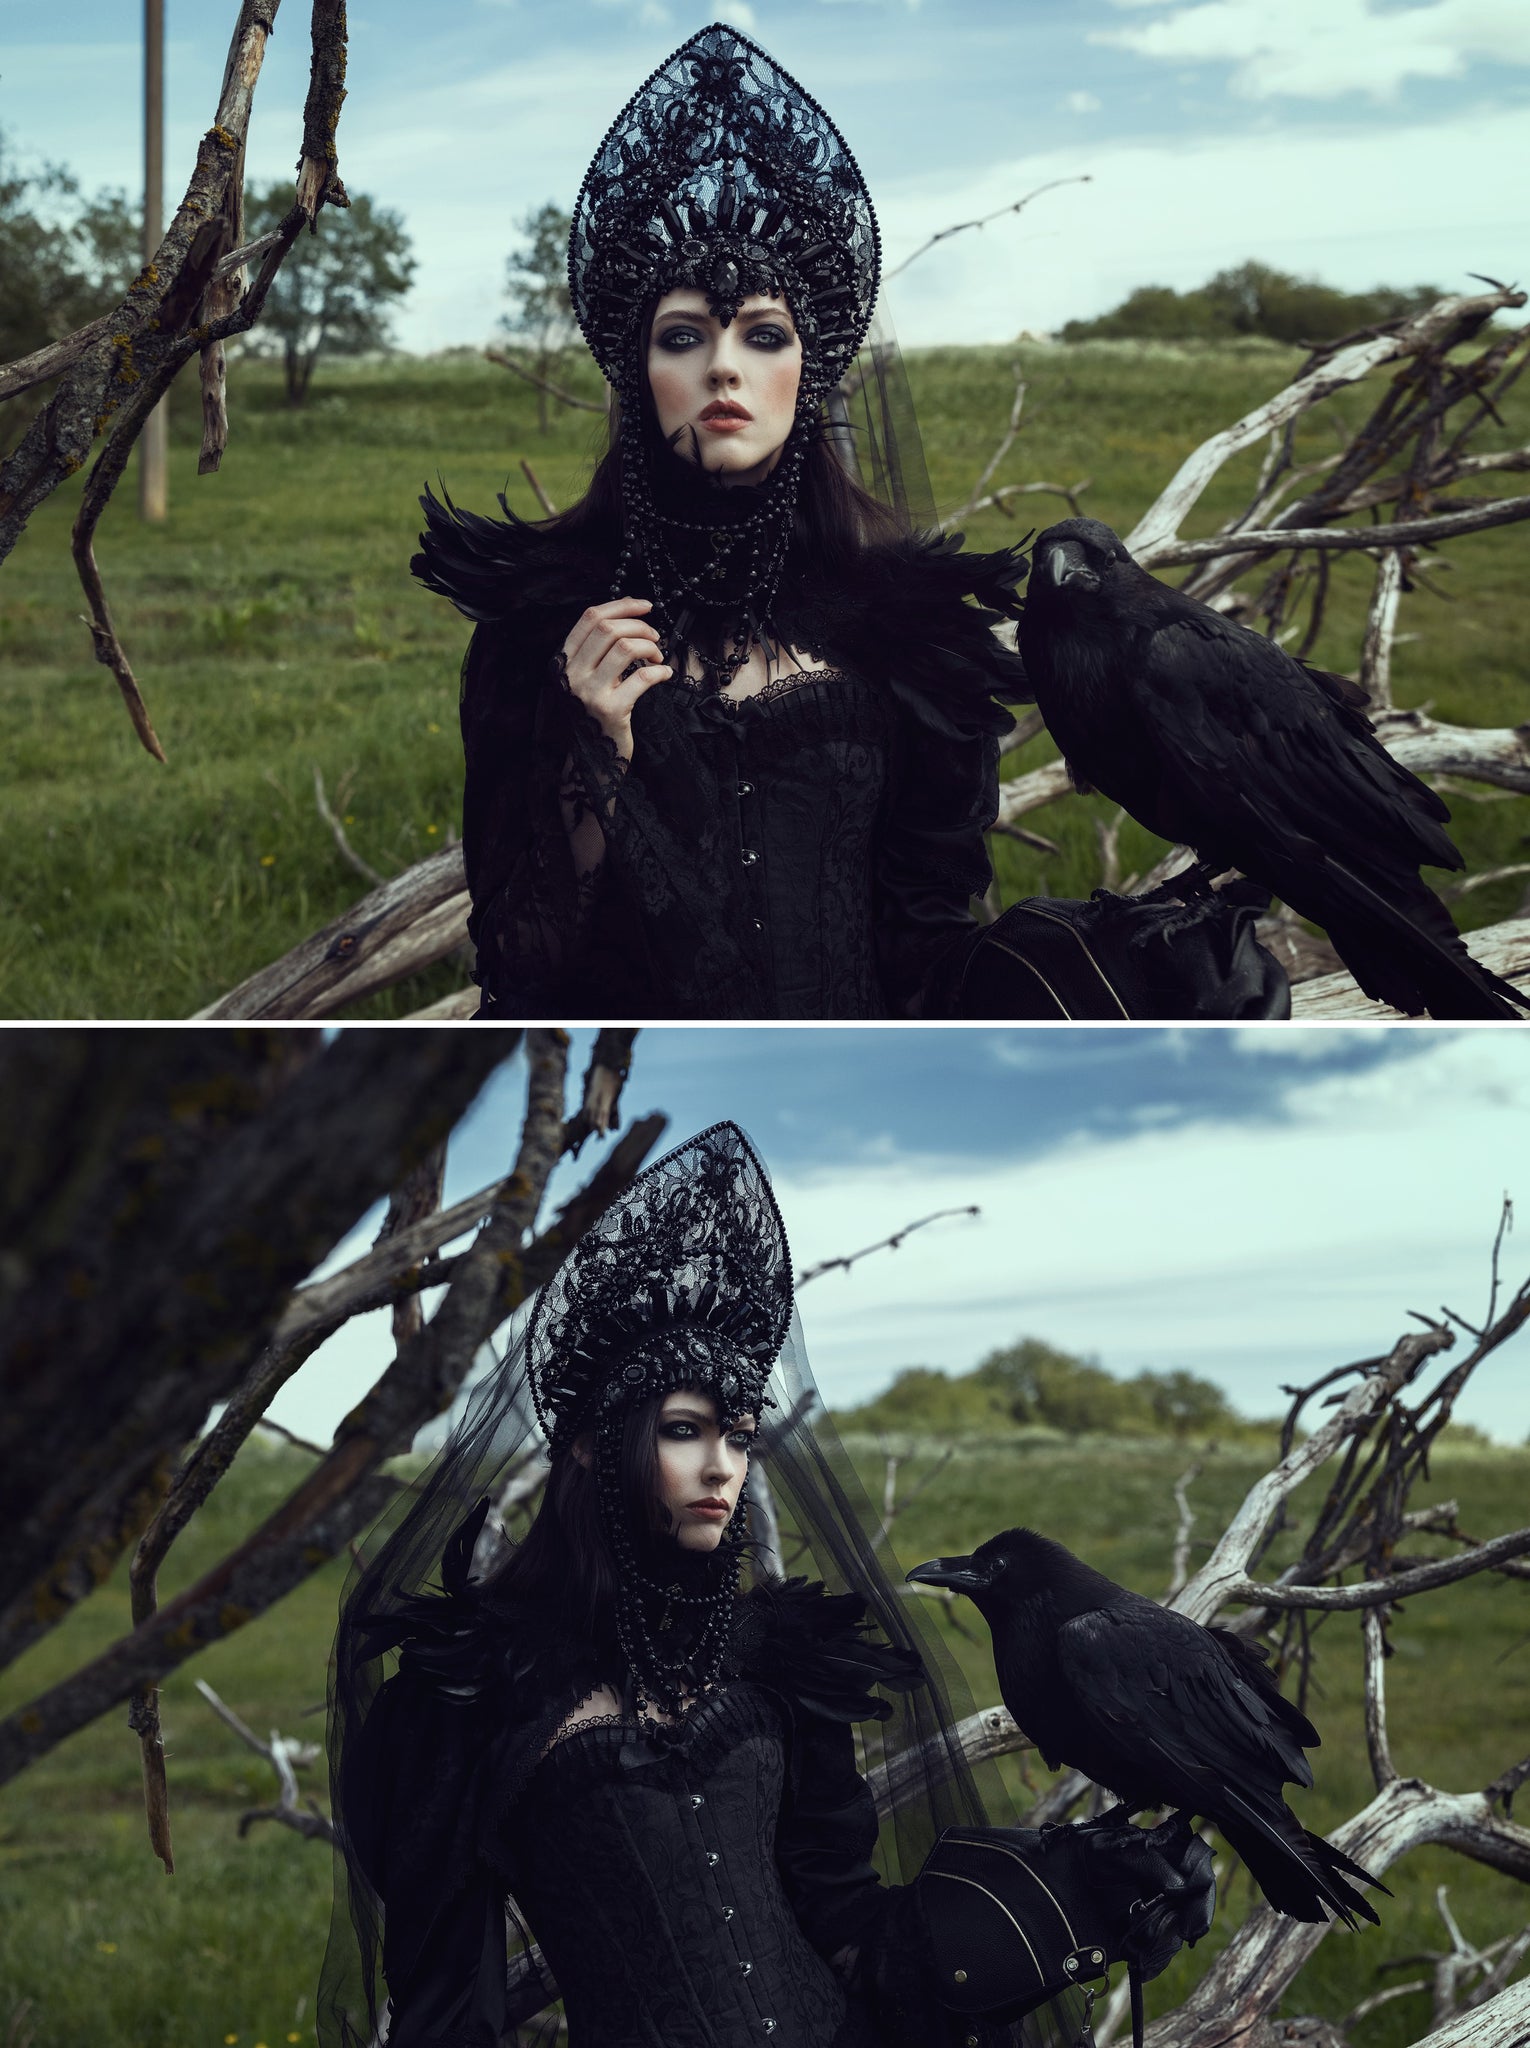 Fairytale portrait by Menna Hossam featuring beautiful headpiece and raven